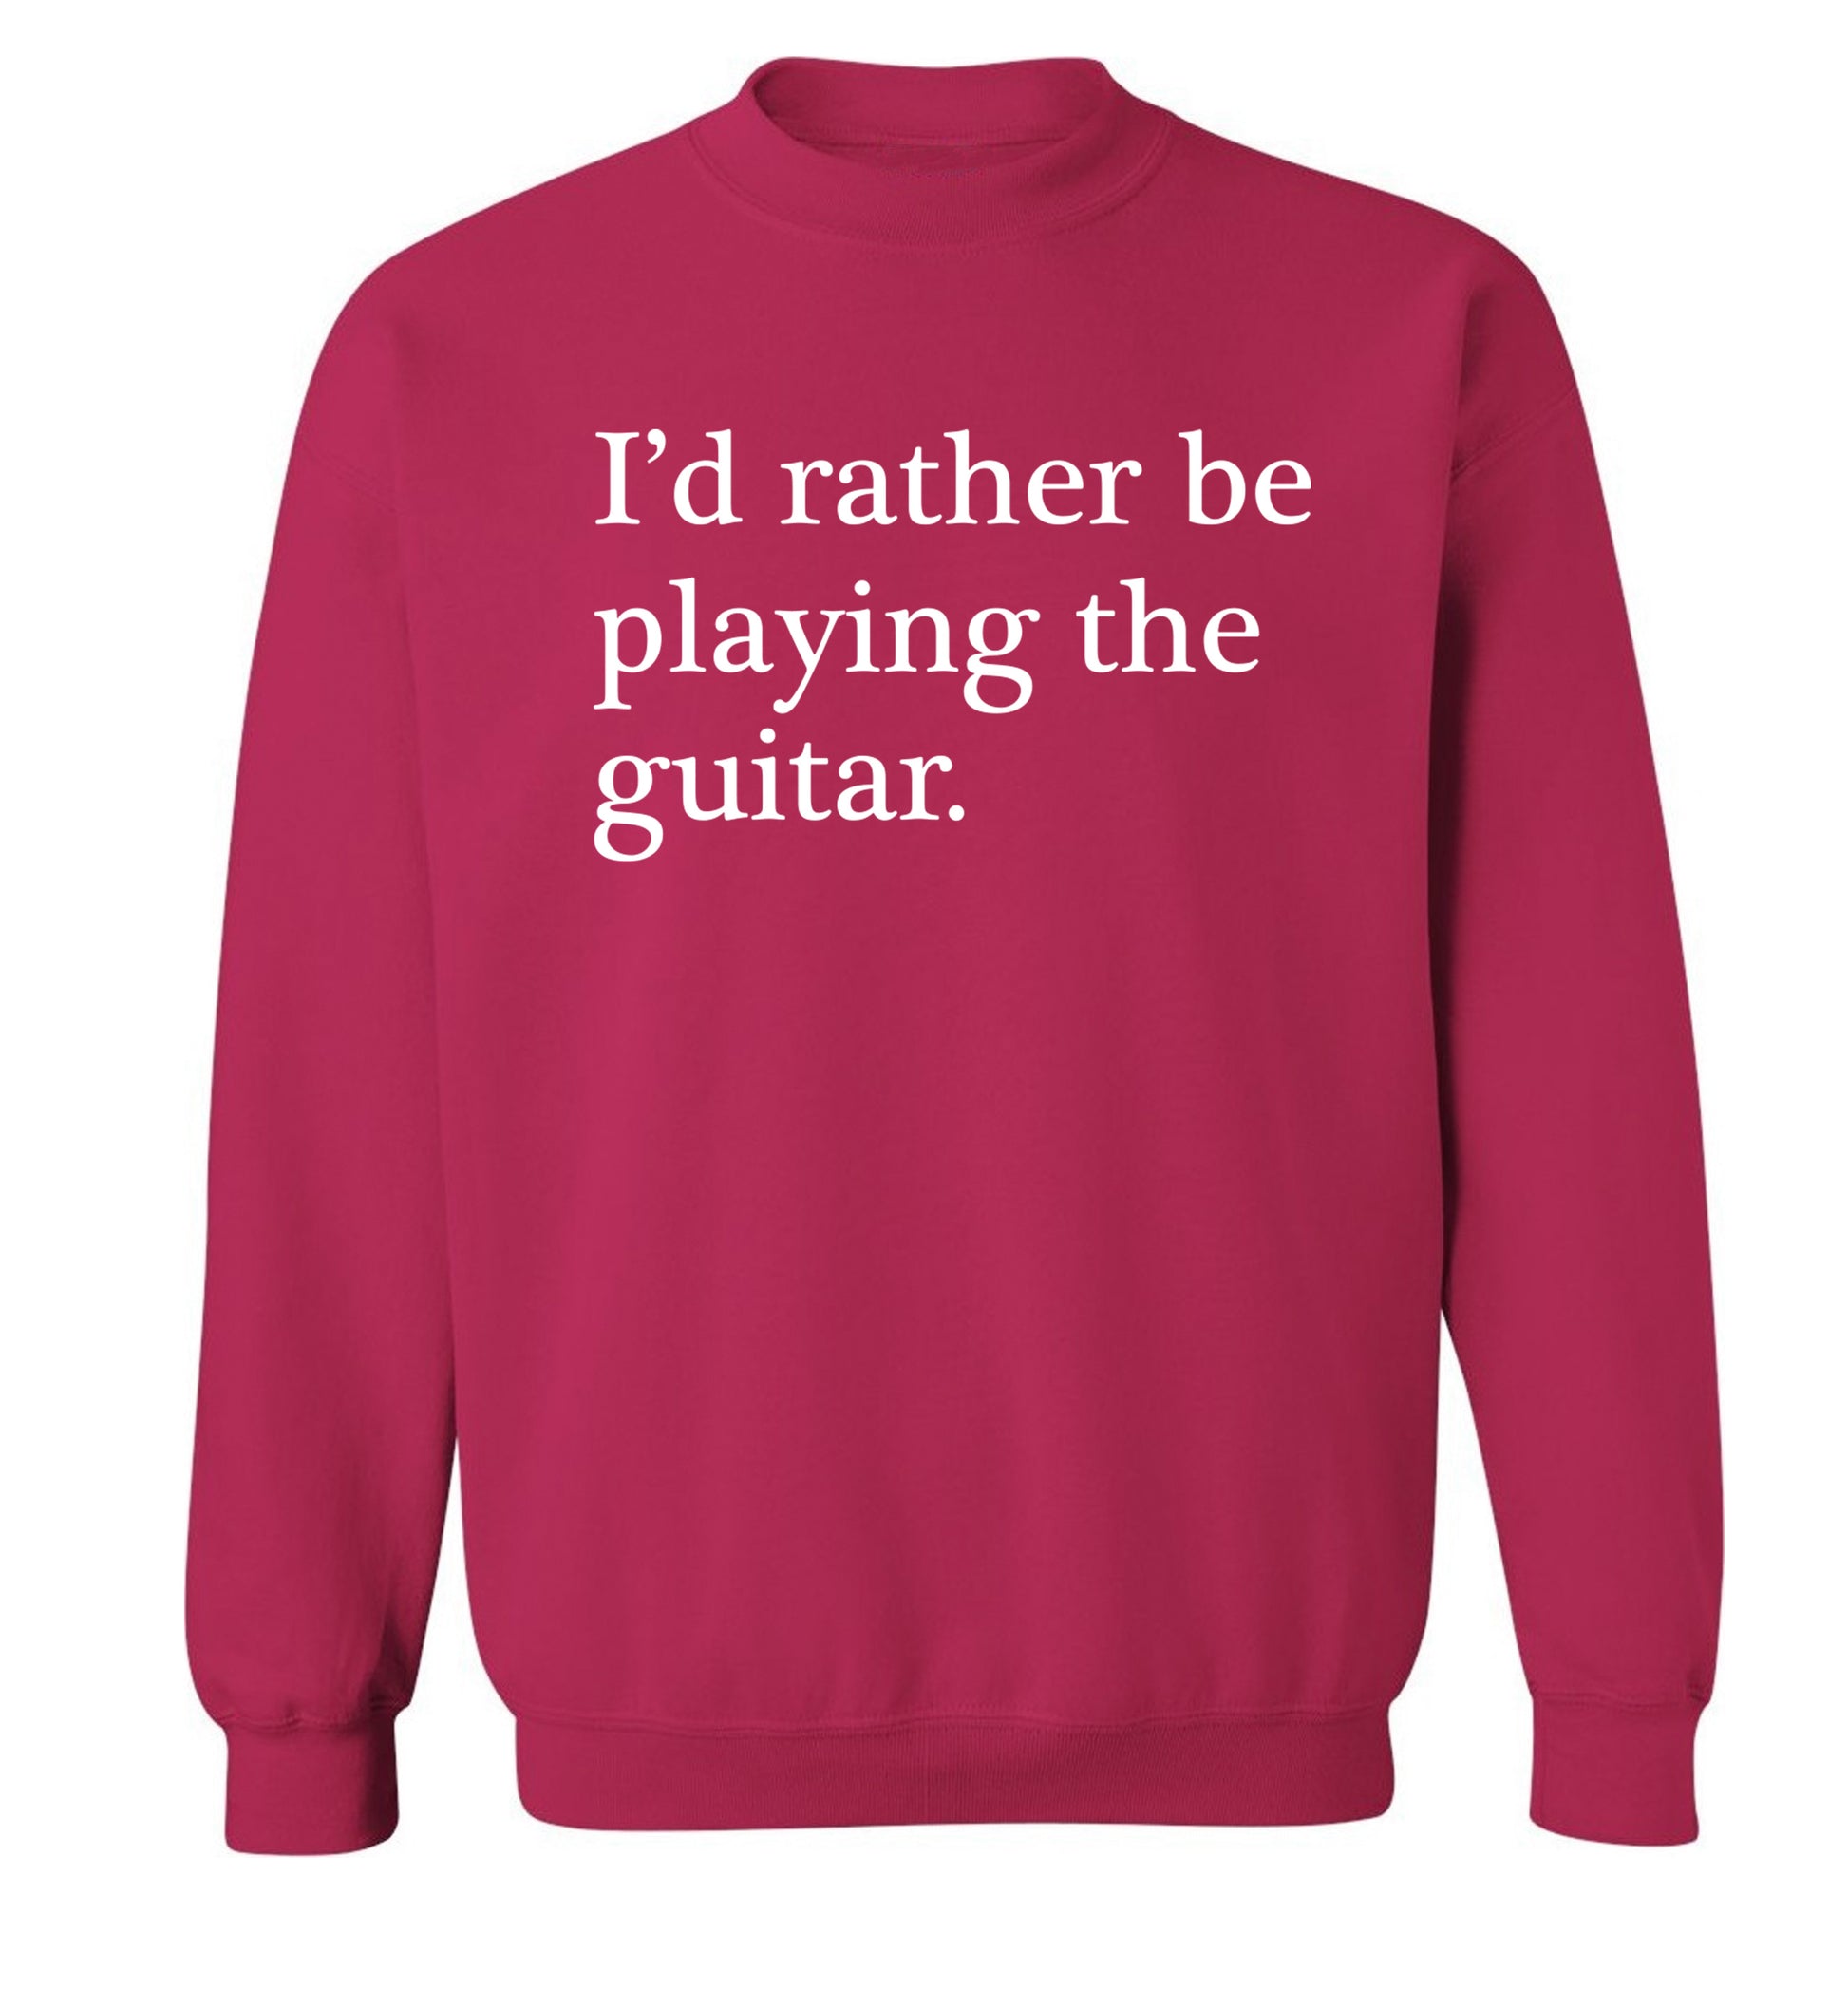 I'd rather be playing the guitar Adult's unisex pink Sweater 2XL